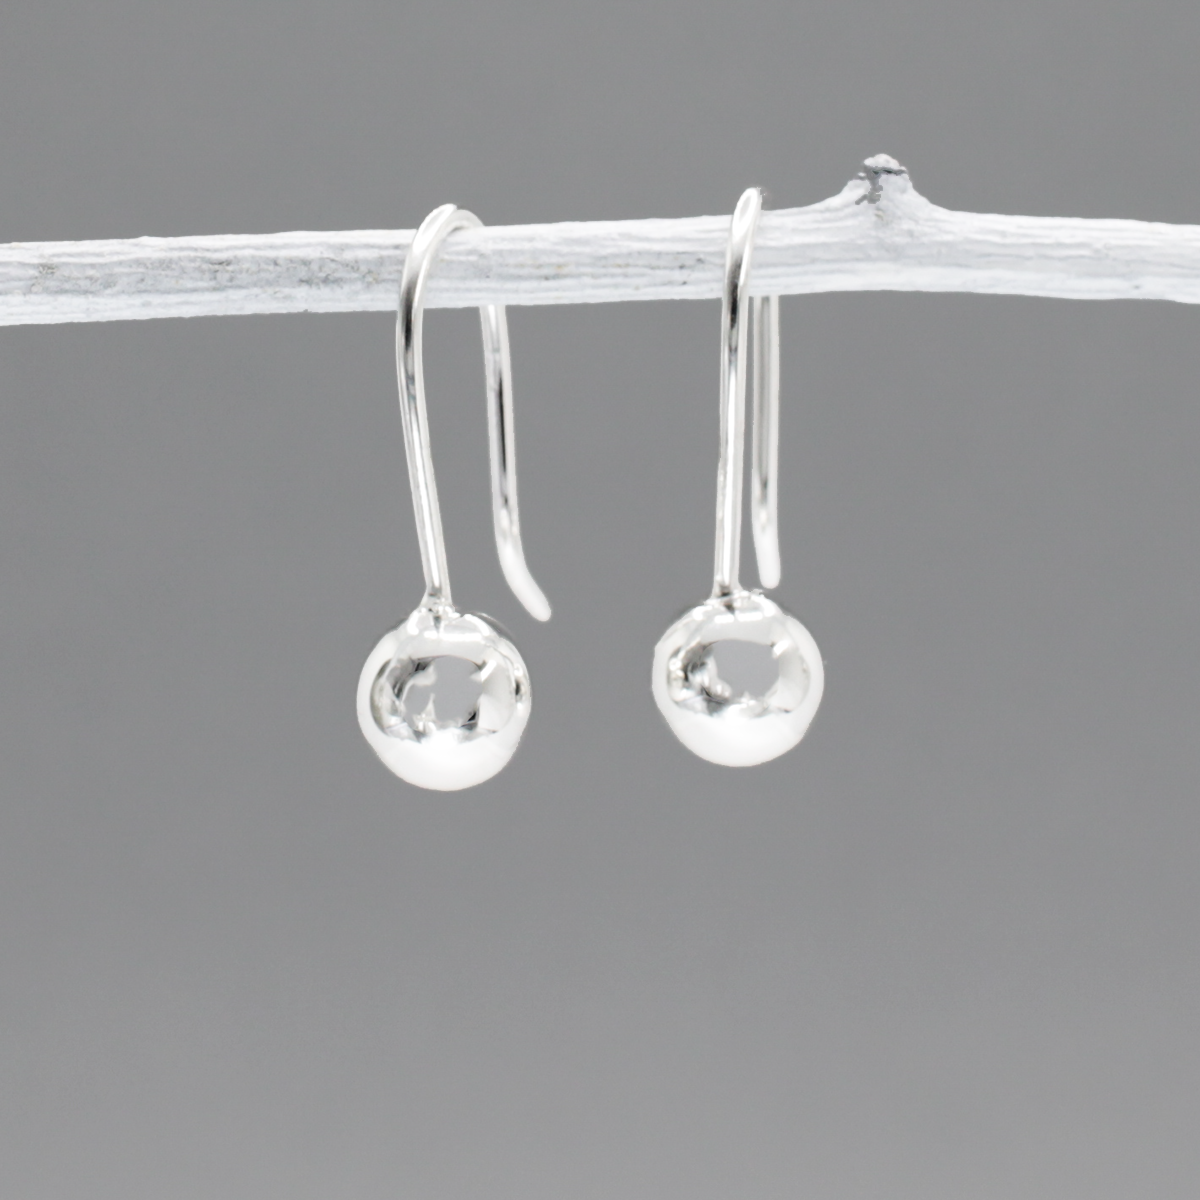 Aran - Drop Silver Earrings - Dangle Curated and designed by Emilio Sotelo Jewelry for Croi Kinsale Jewellery in Kinsale West Cork Ireland Europe. Find exceptional handmade silver and gold jewellery at affordable prices for birthday gifts and Christmas presents. Handcrafted Silver jewelry. Find the best affordable jewellery